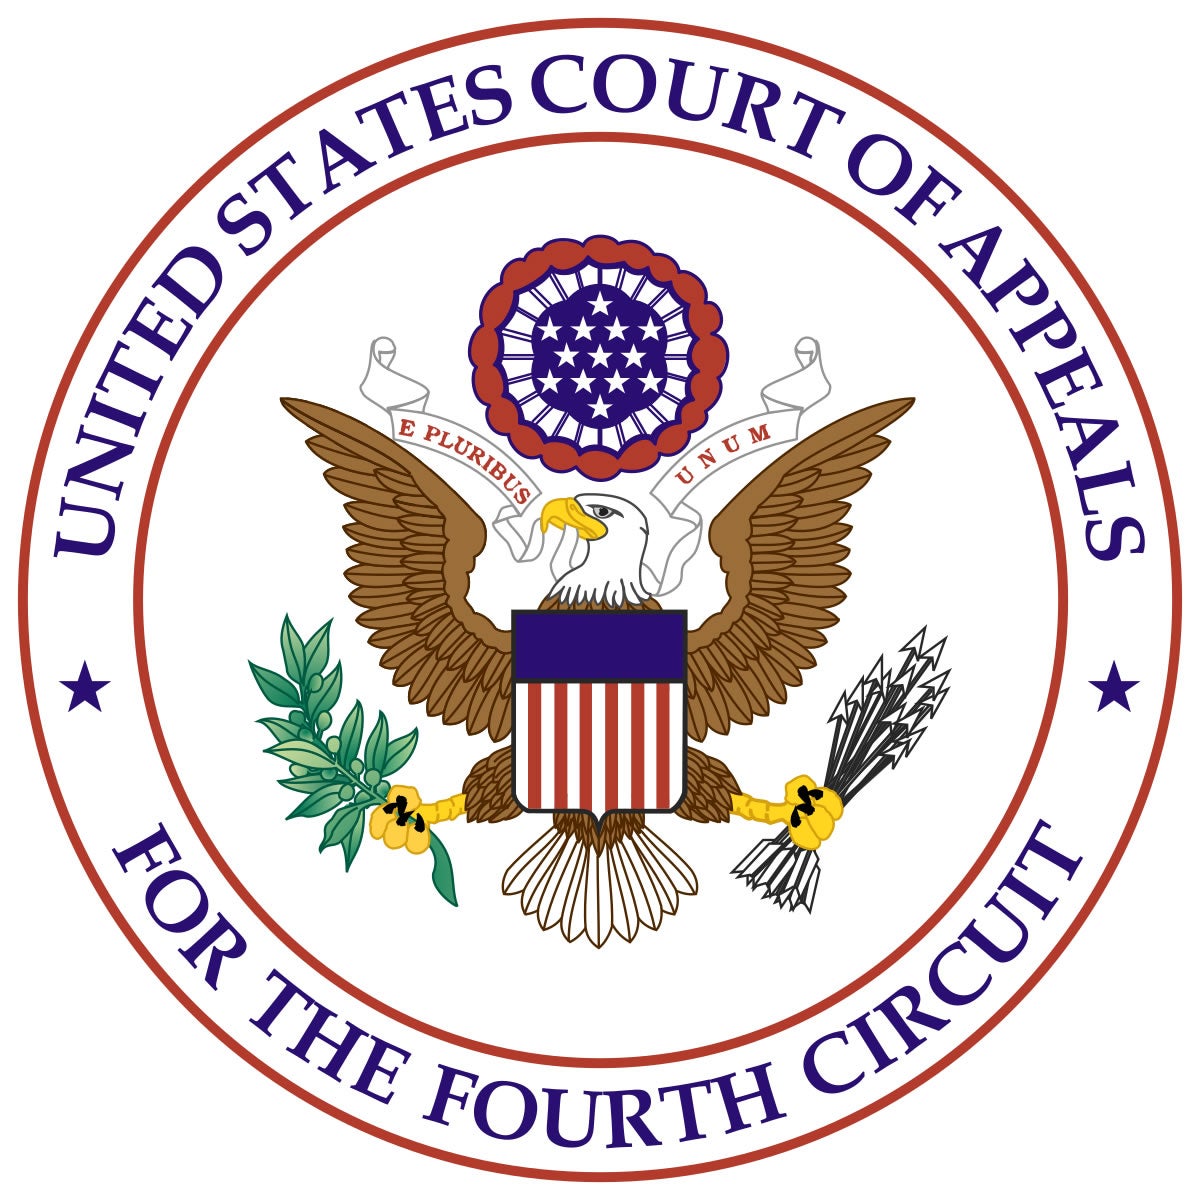 United States Court of Appeals for the Fourth Circuit Simon Perry